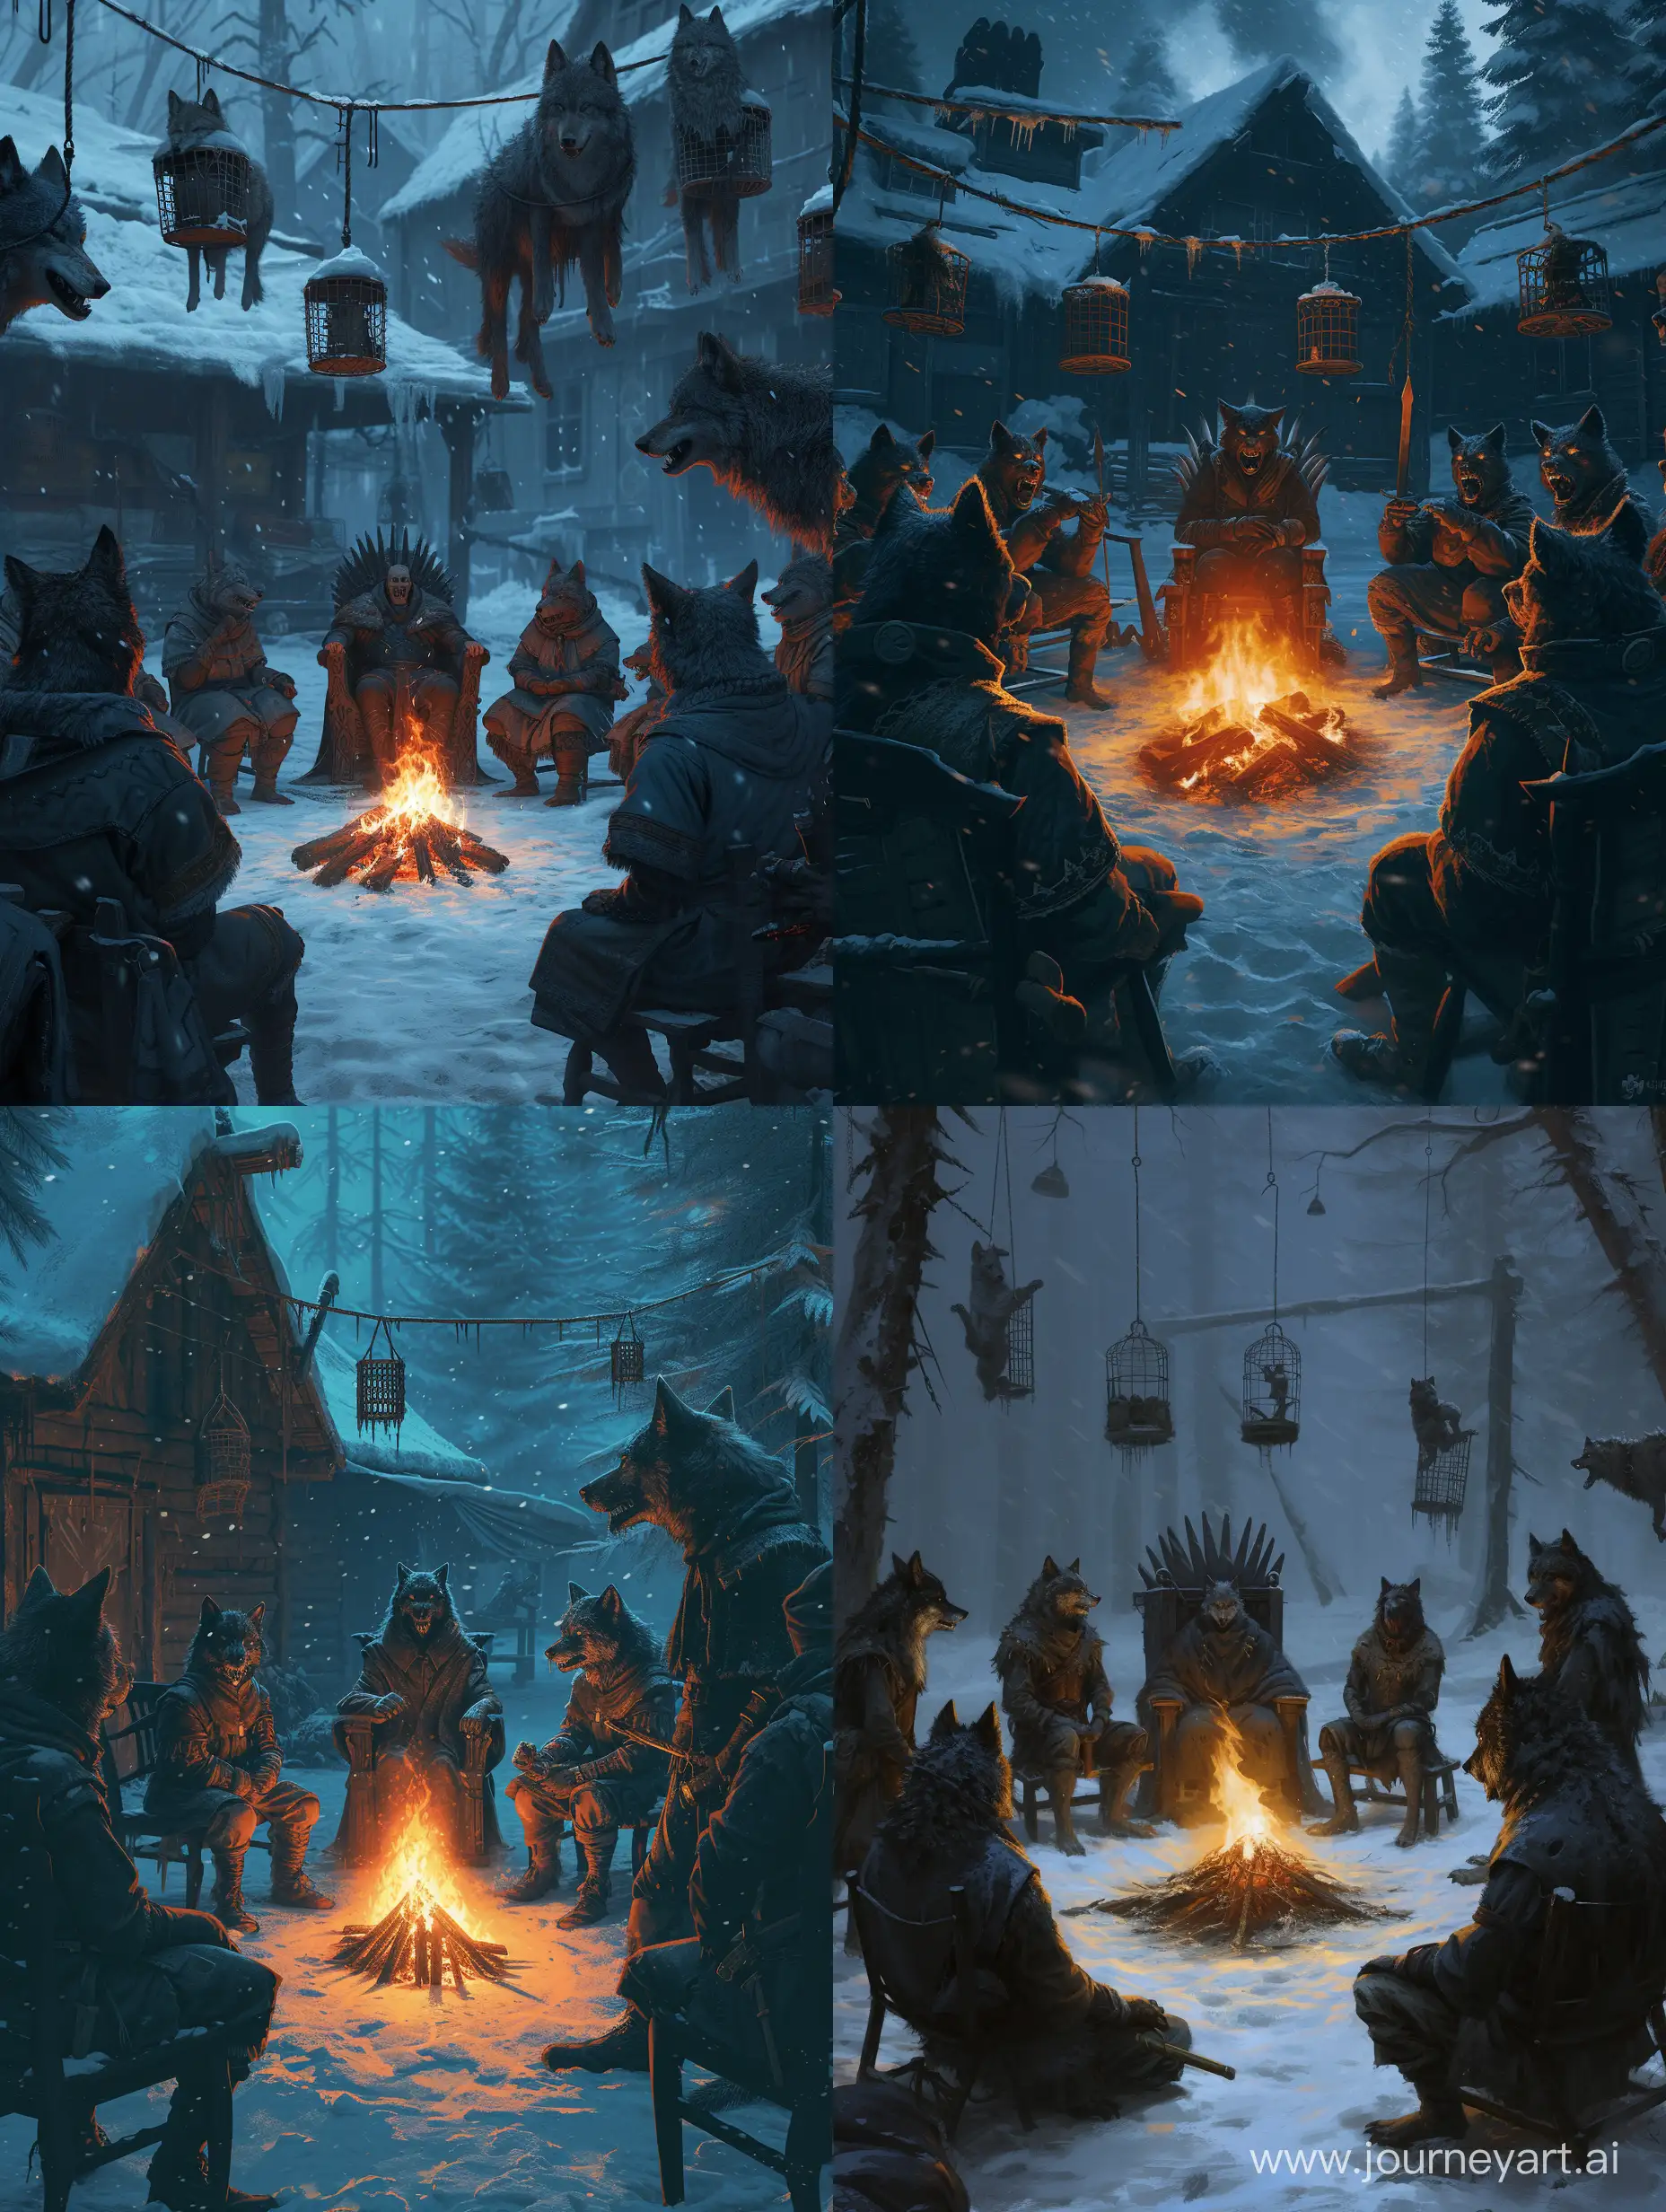 anthropomorphic wolf warriors,circle around the fire,The leader of the wolves sitting on throne in the middle,in snowy horror camp,hanging Gibbet cages In the background,fierce,furious,irate,Detailed clothing.incredible detail,terrifying,Cinematic.